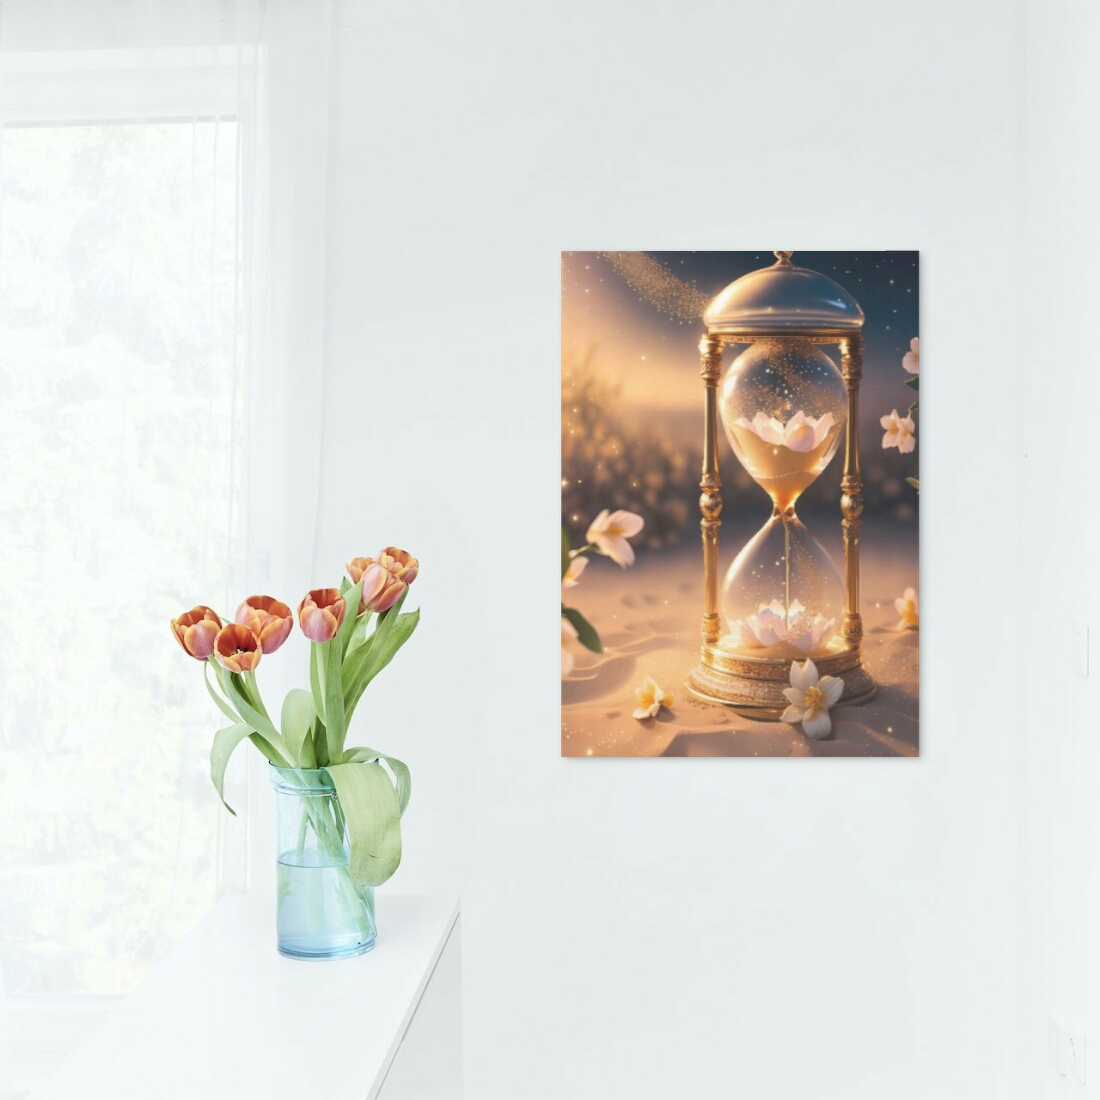 Hourglass with Flowers in the Desert Printable wallart - Digital Art File cover image.